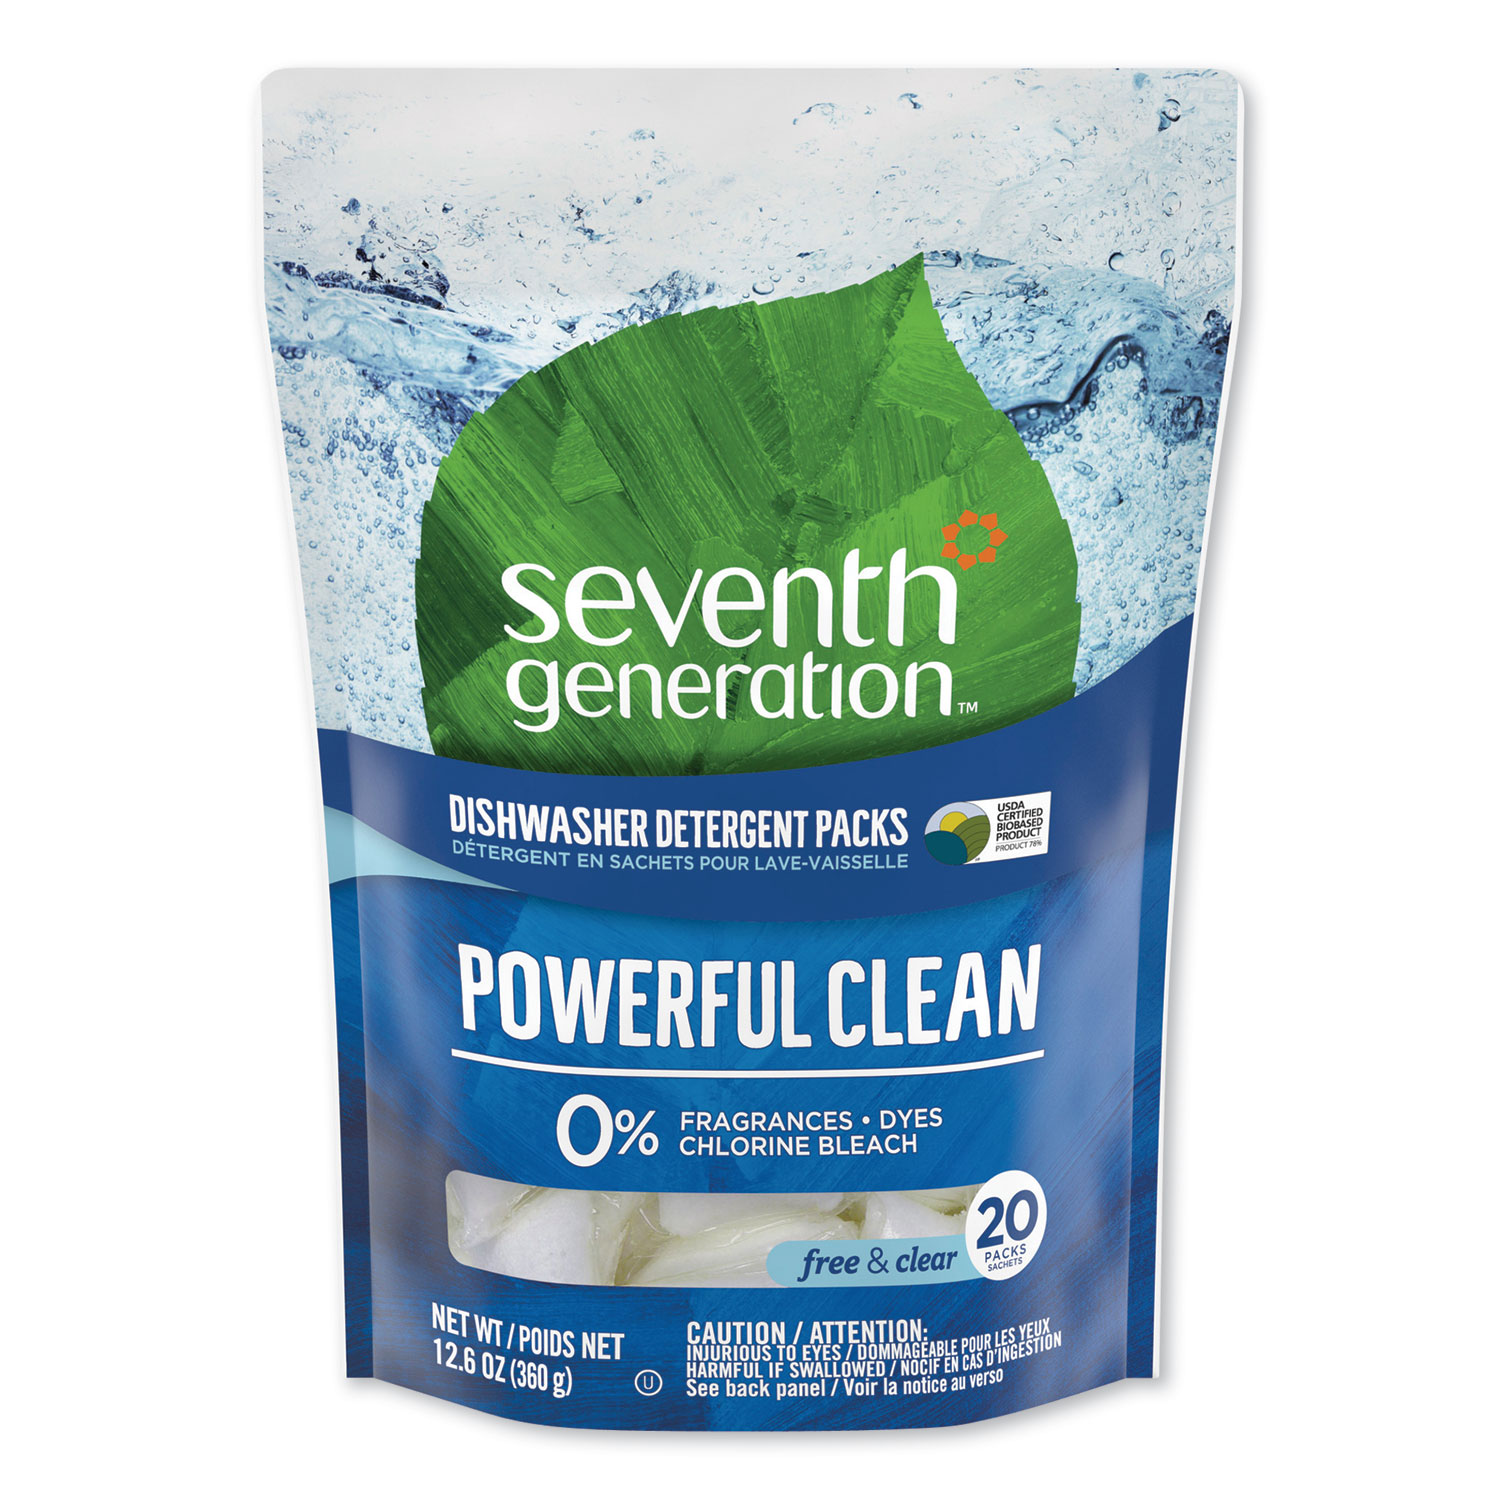  Seventh Generation 22818 Natural Dishwasher Detergent Concentrated Packs, Free & Clear, 20 Packets/Pack (SEV22818PK) 